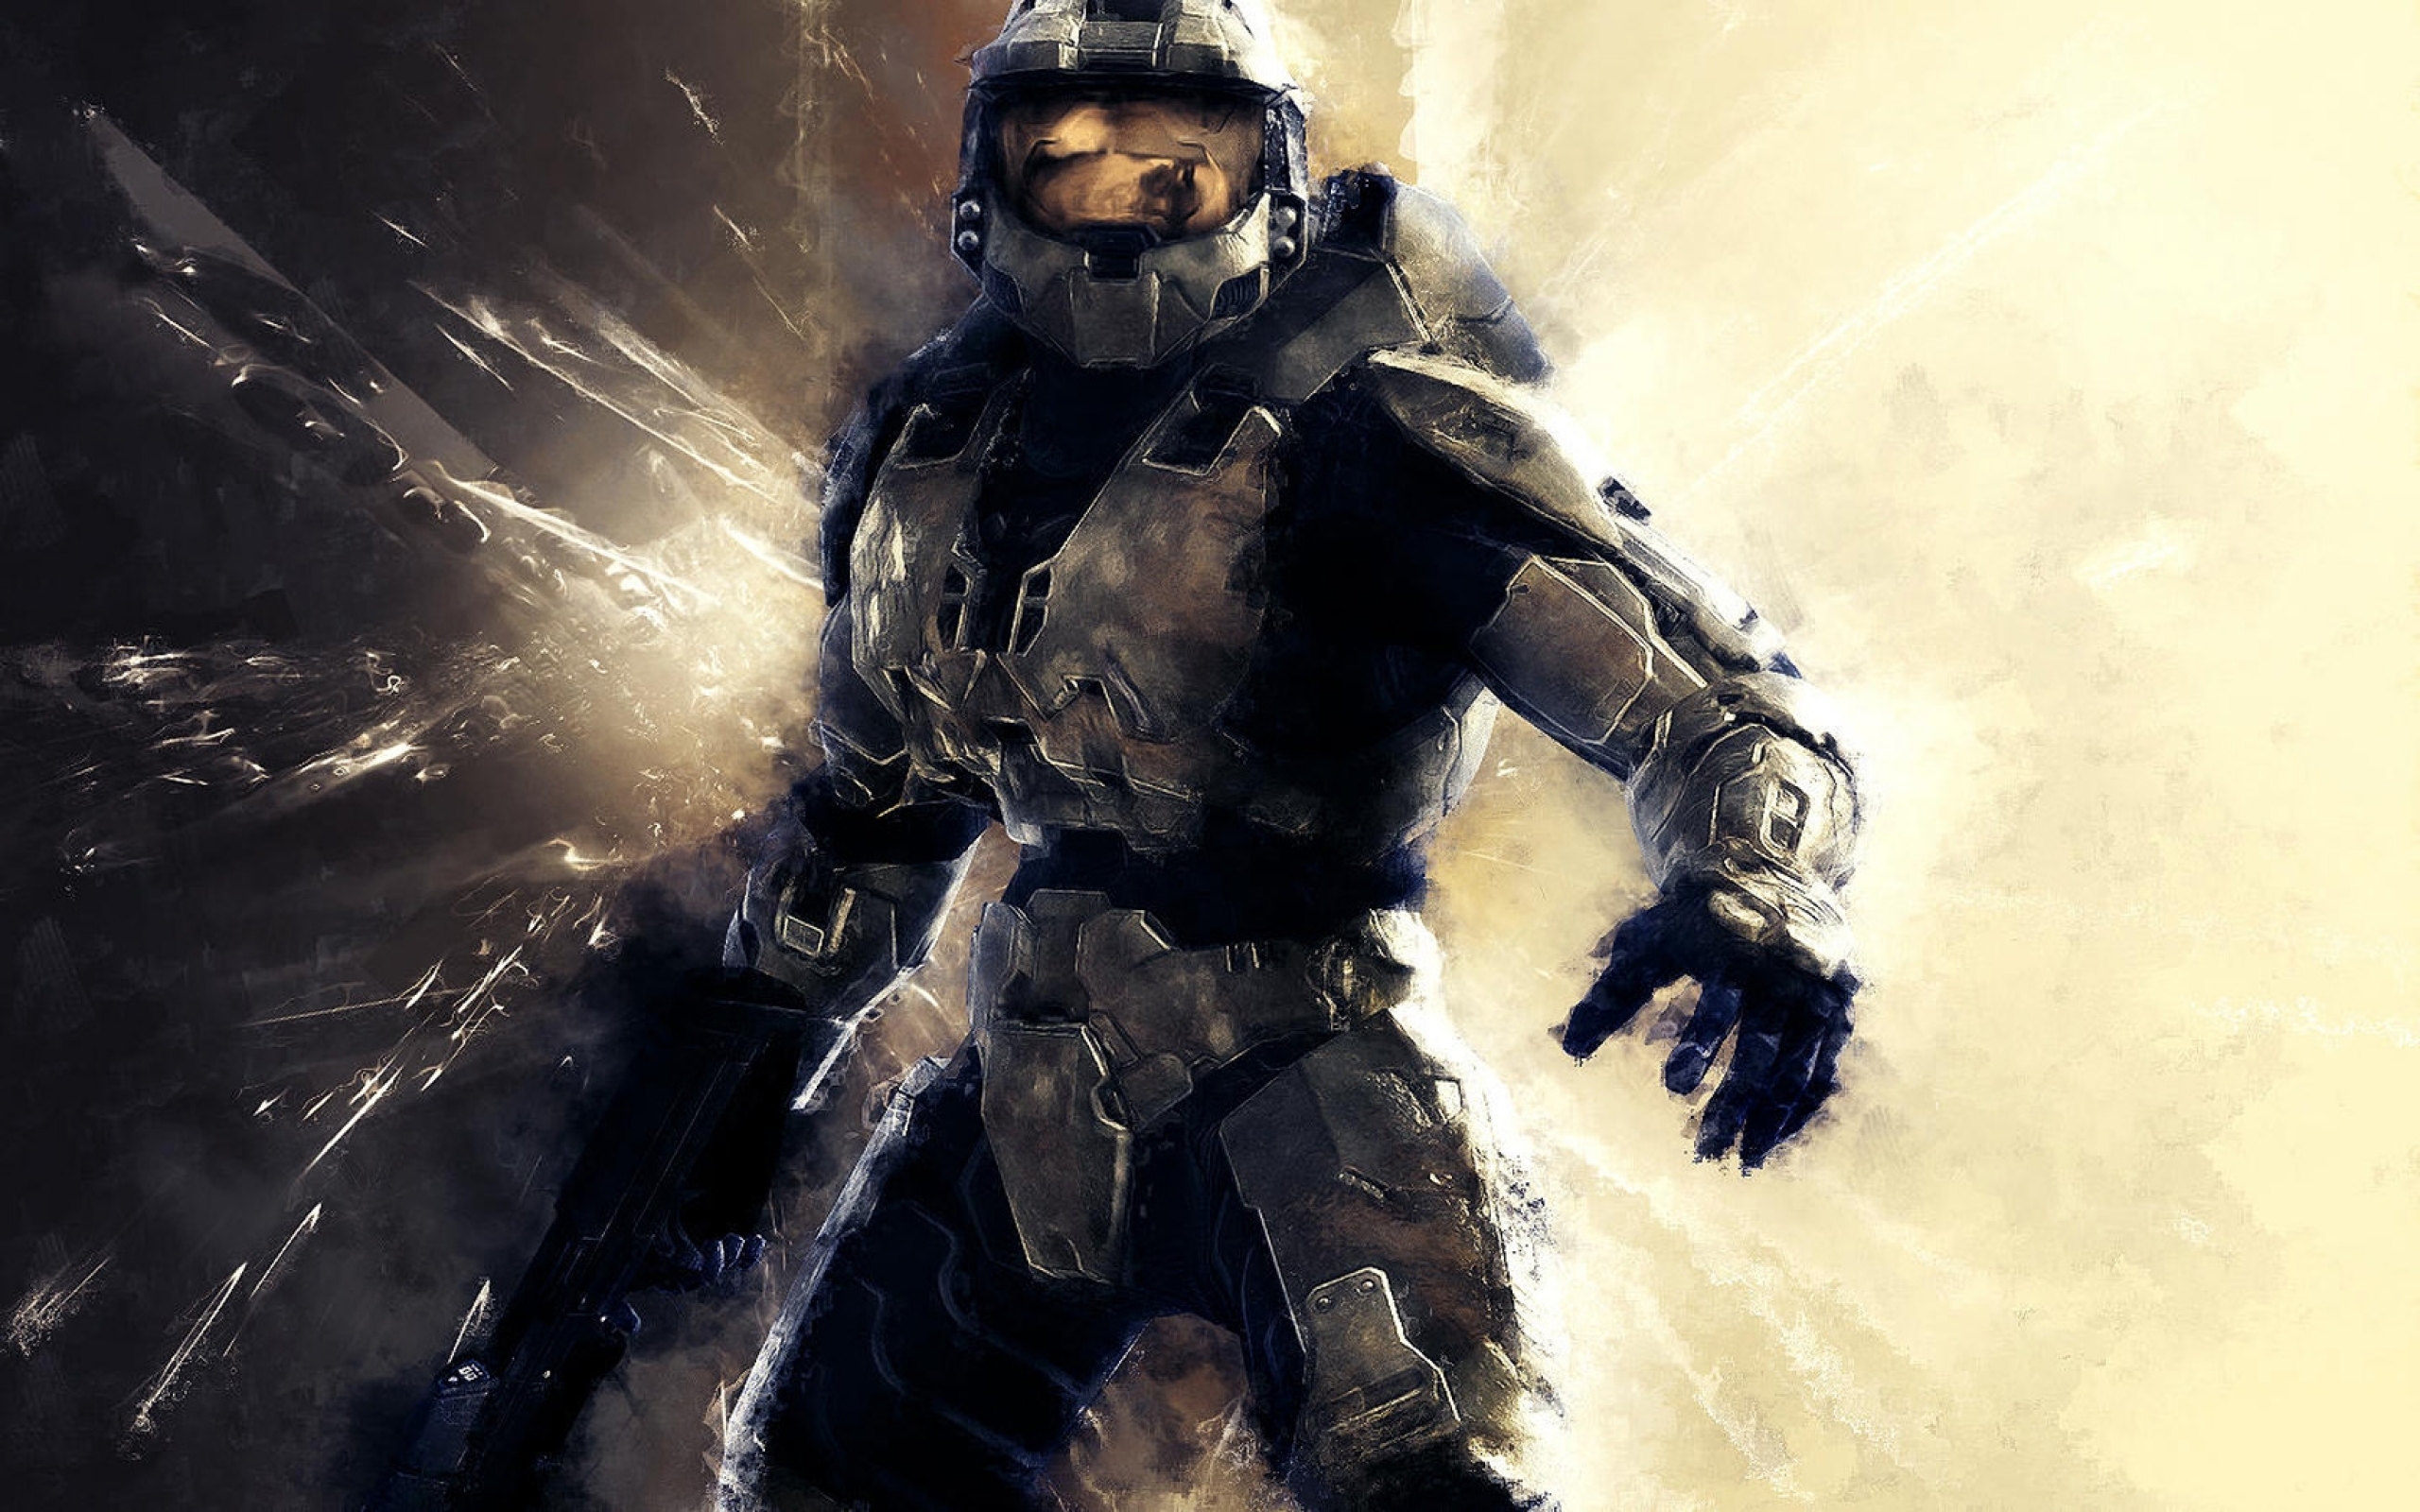 Video Game Halo 4 2560x1600